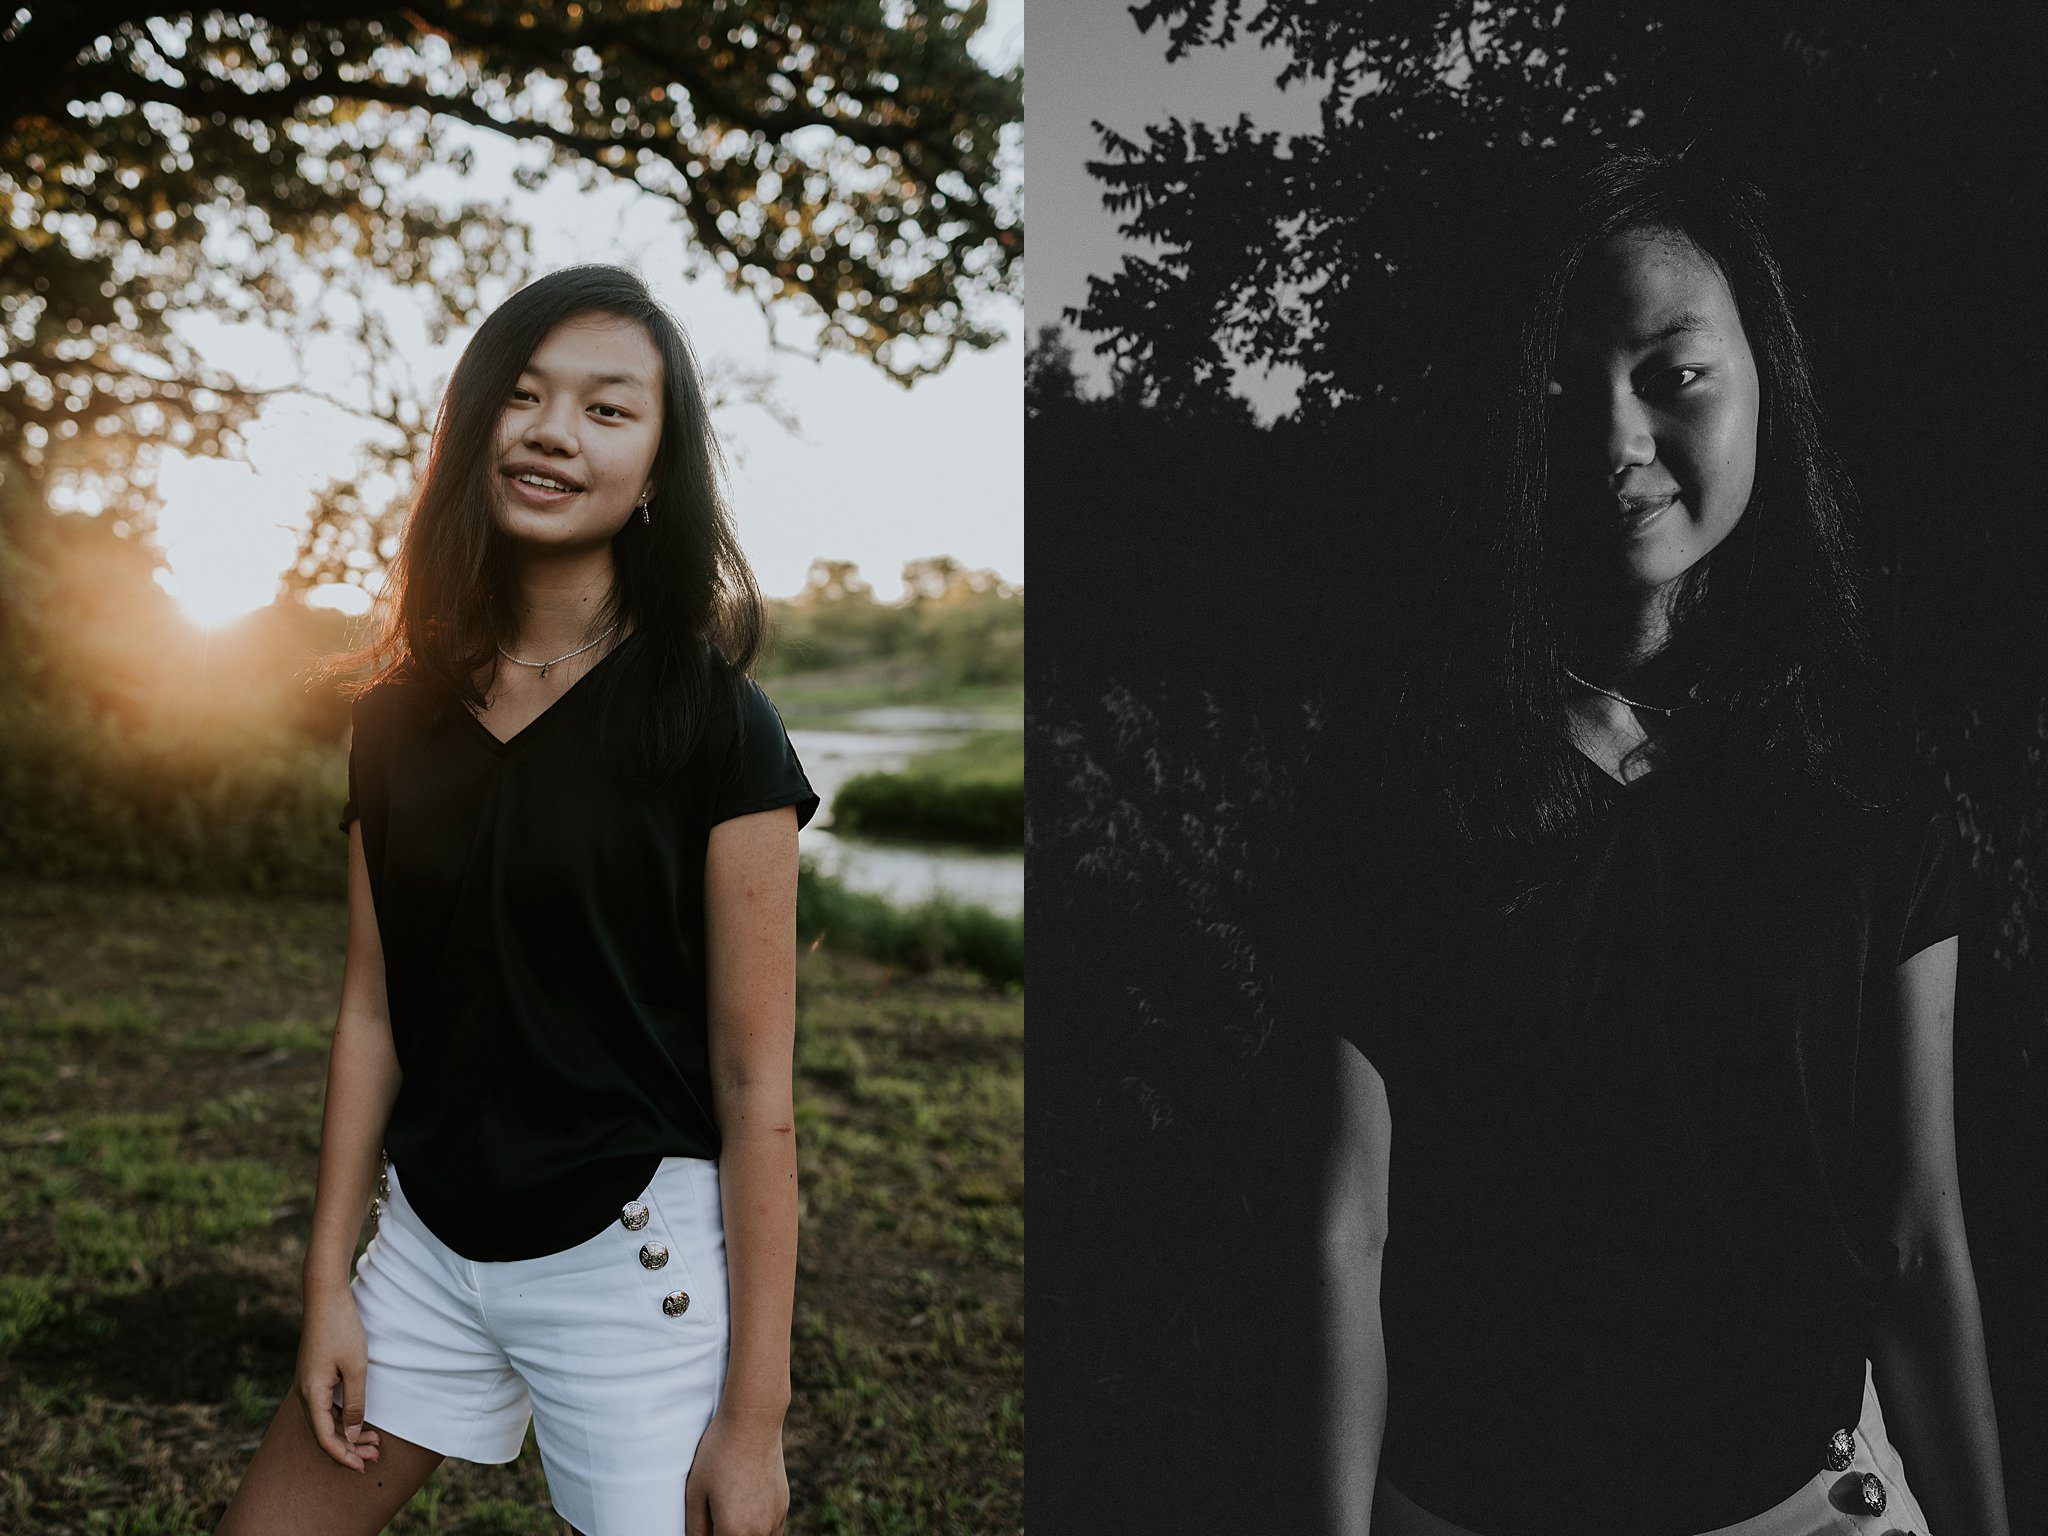 This is a dip-tic of photos of a girl during her senior photos in northwest Iowa. On the left is a color image of a girl with black hair and a black shirt with white shorts. She is smiling at the camera and the sun is coming through the trees behind her on the left casting a golden glow. Behind her on the right is a black and white high contrast image. Part of the girl's face is cast in direct sunlight while the other half is cast in shadow. She is smiling at the camera and it makes for a very dramatic senior portrait. 